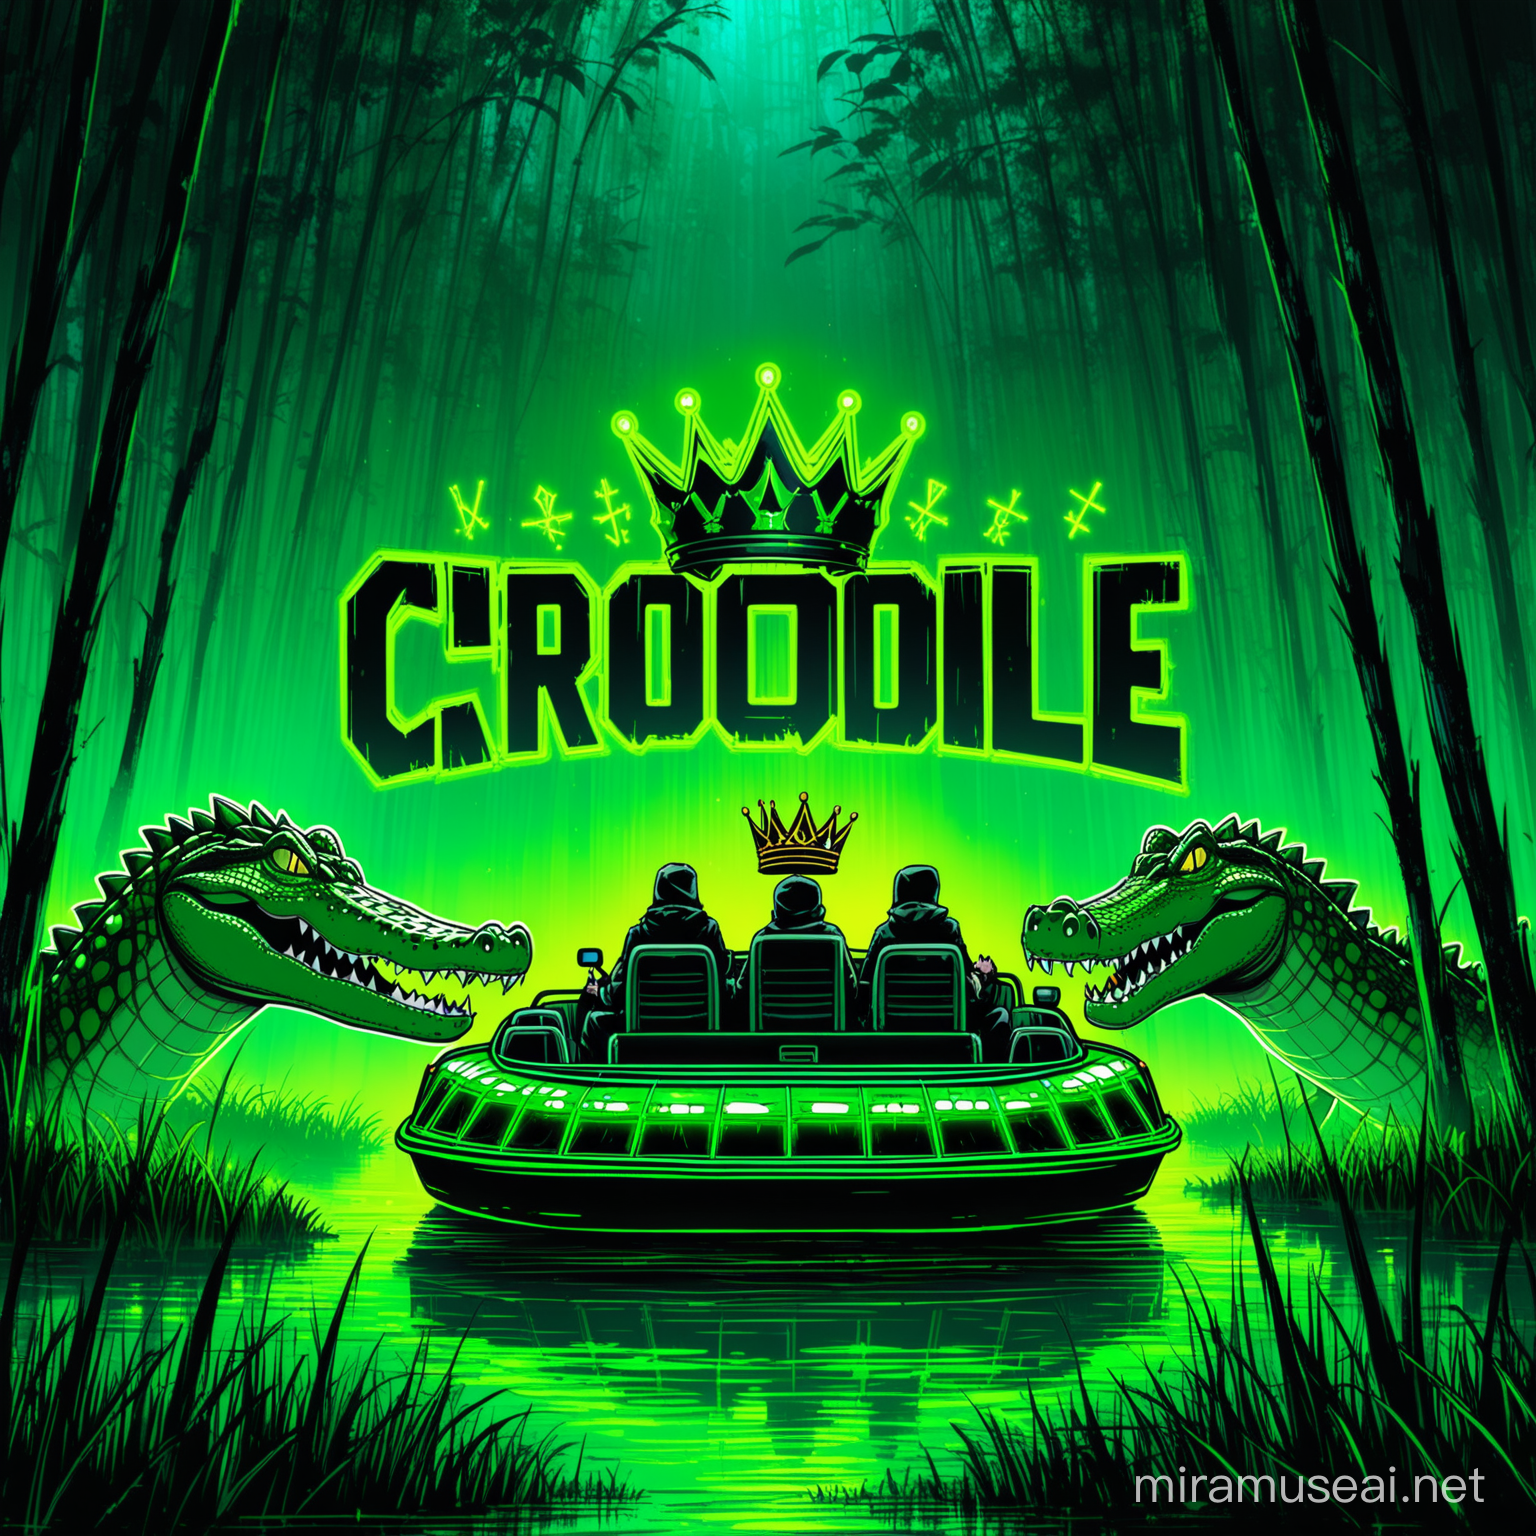 Crocodile driving airboat (noir) group
appreance-neon green crown (only) / full body/ 
background- swamp/lake/weeds/ noir- crco runes